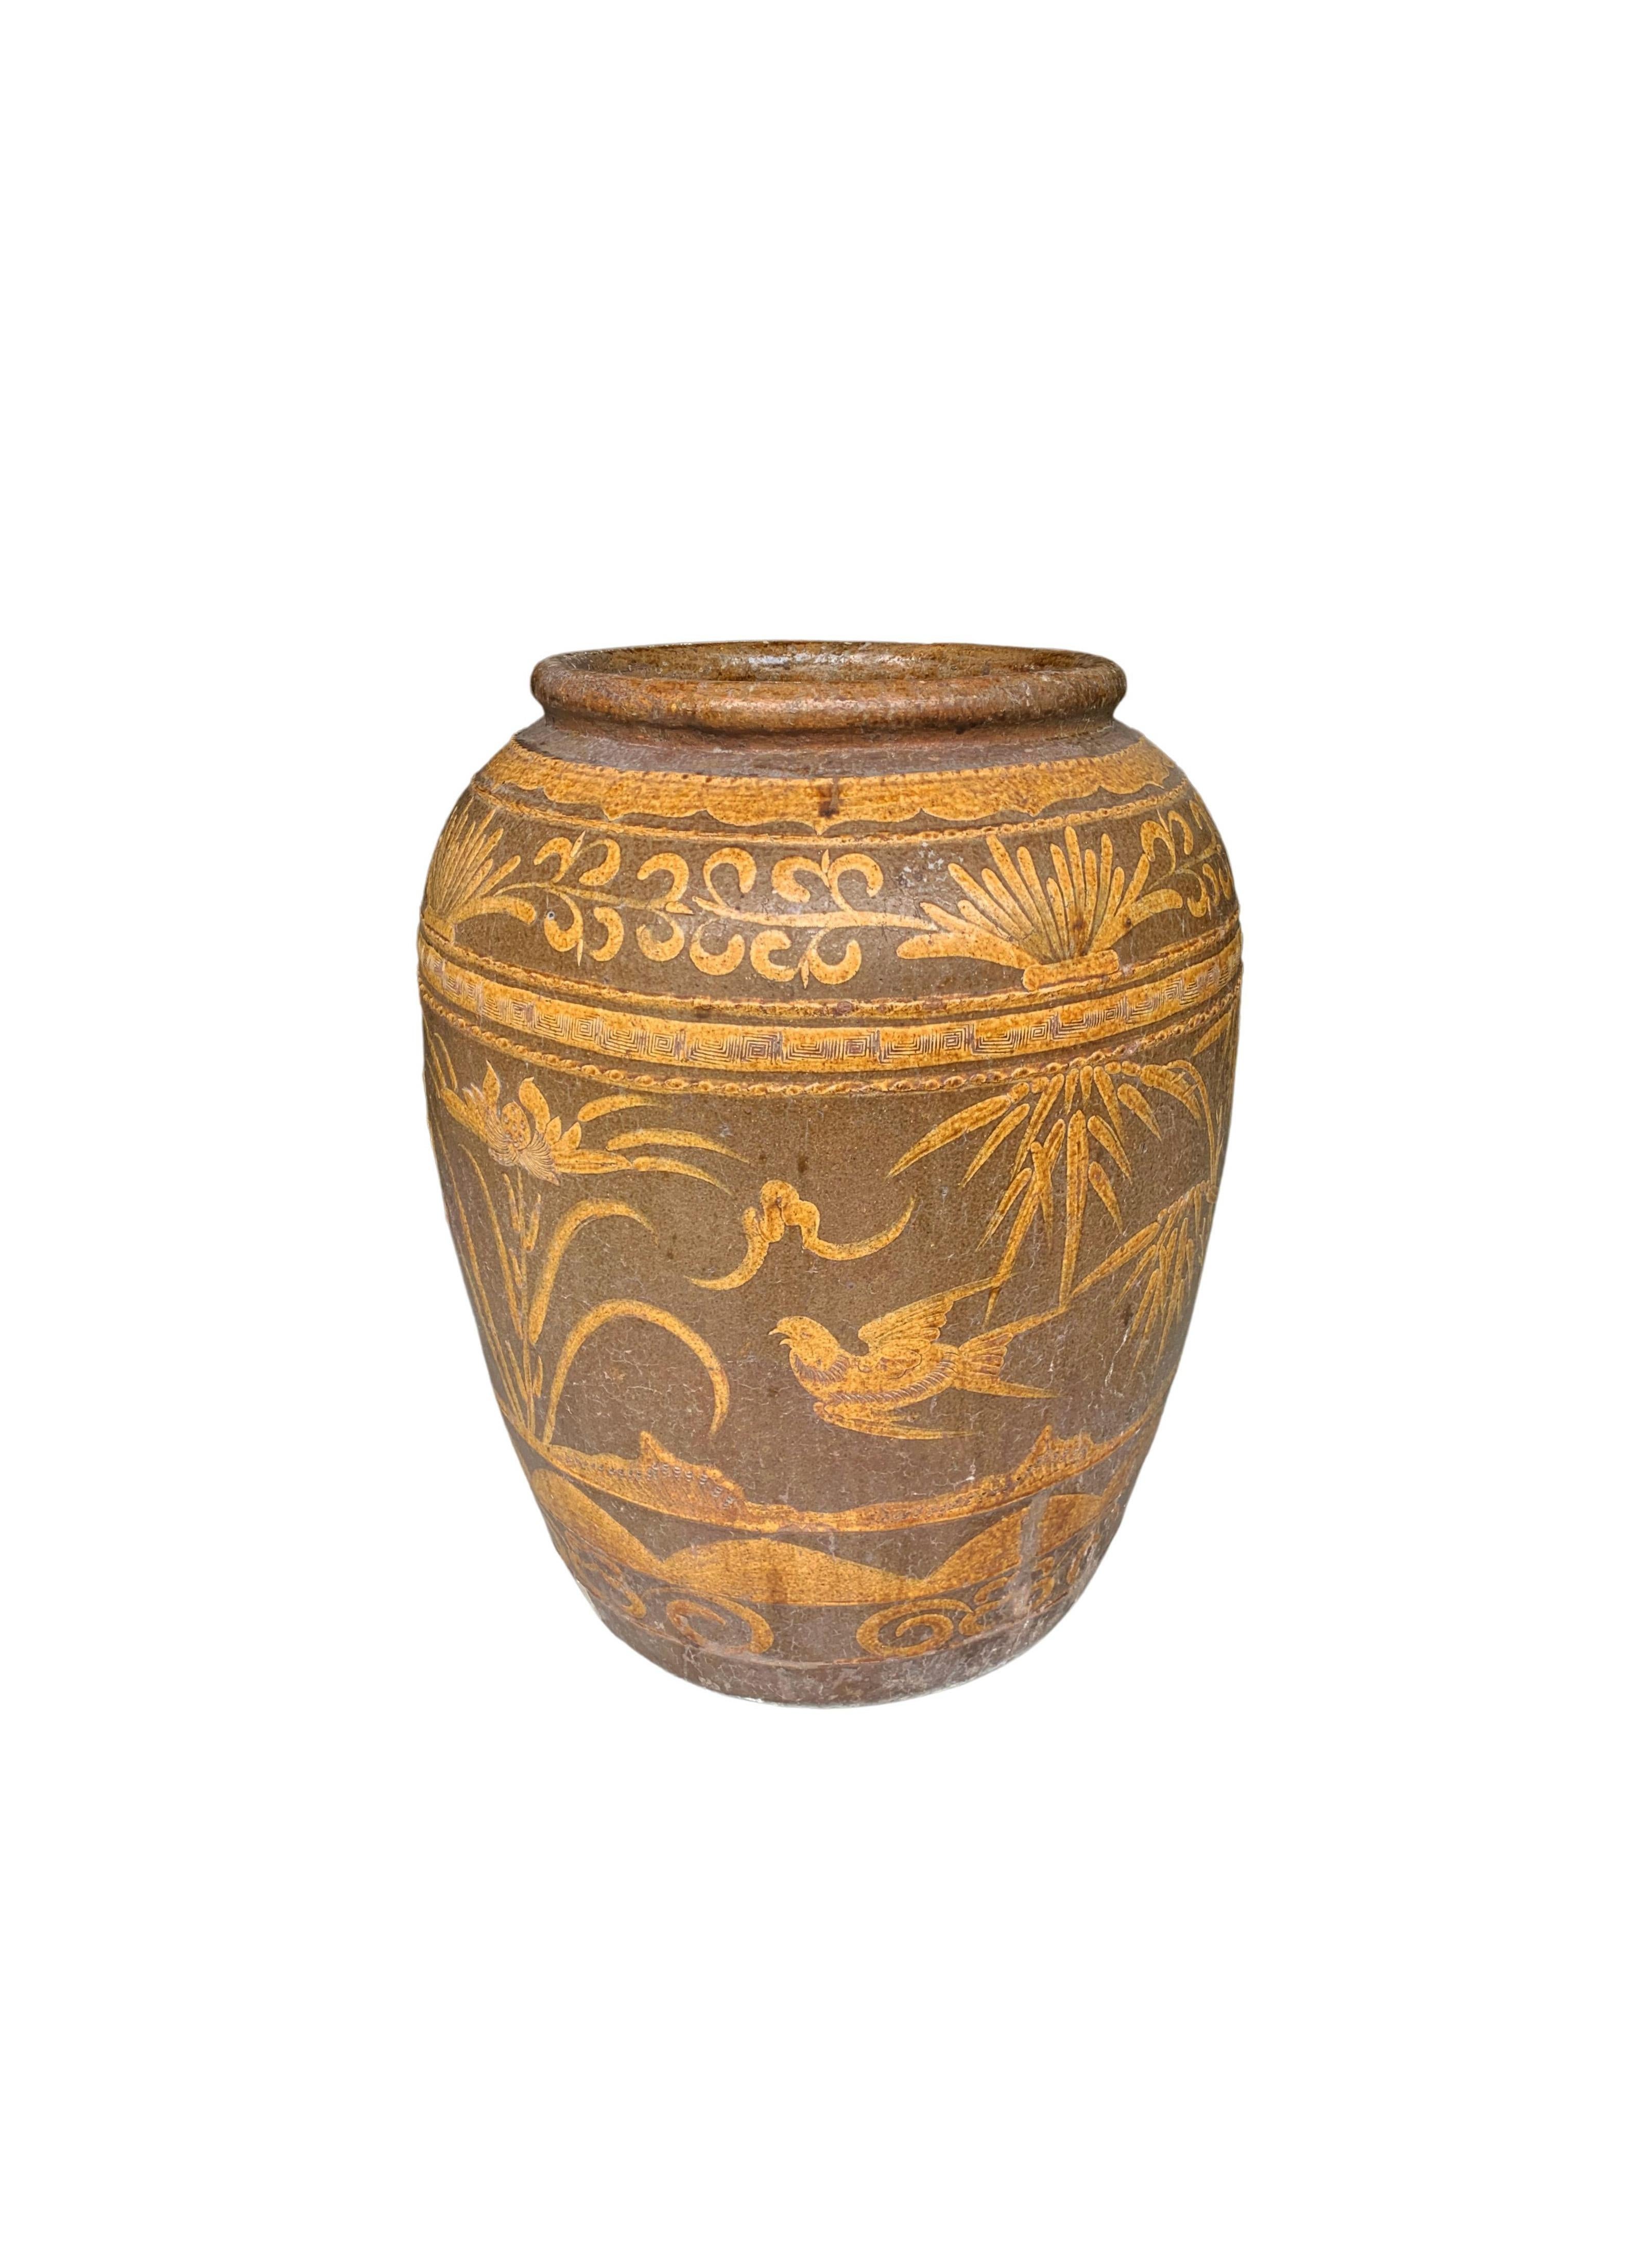 This Pickling Jar was once used to pickle eggs and features a wonderful array of hand-painted motifs which include birds, foliage and other subtle symbols and patterning. The hand-painted detailing is raised and rich in texture as the painting was